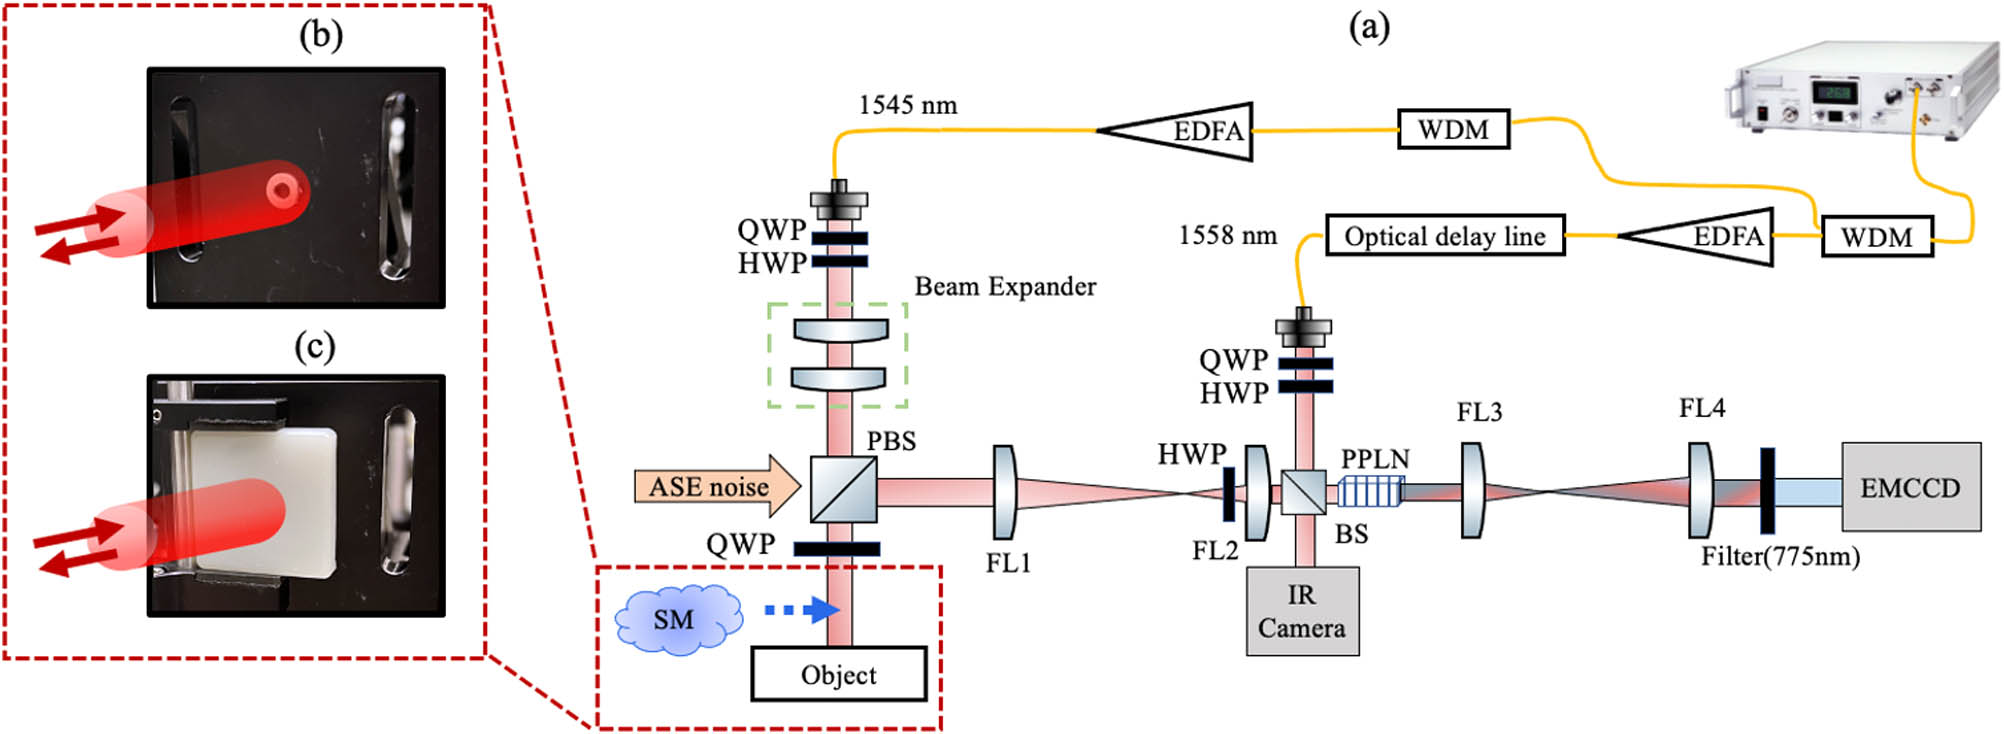 (a) Experiment setup. Mode-locked laser pulses are separated into two arms by using WDM filters, with signal and pump wavelengths at 1545 and 1558 nm, respectively. The signal beam is incident on an obscured object. The backscattered signal photons are combined with the pump and are then upconverted in a nonlinear crystal to generate SF output centered at wavelength 775.5 nm. The time-resolved measurements can faithfully reconstruct the 3D object image captured by the EMCCD camera. (b) Picture of the object (a washer) attached on an aluminum block. (c) Picture of the obscured object, i.e., the washer obscured by the scattering media (SM). WDM, wavelength division multiplexer; EDFA, erbium-doped fiber amplifier; QWP, quarter-wave plate; HWP, half-wave plate; BS, beam splitter; FL, Fourier lens; PPLN crystal, magnesium-doped periodically poled lithium niobate crystal; EMCCD, electron multiplying silicon charge coupled device; ASE, amplified spontaneous emission.